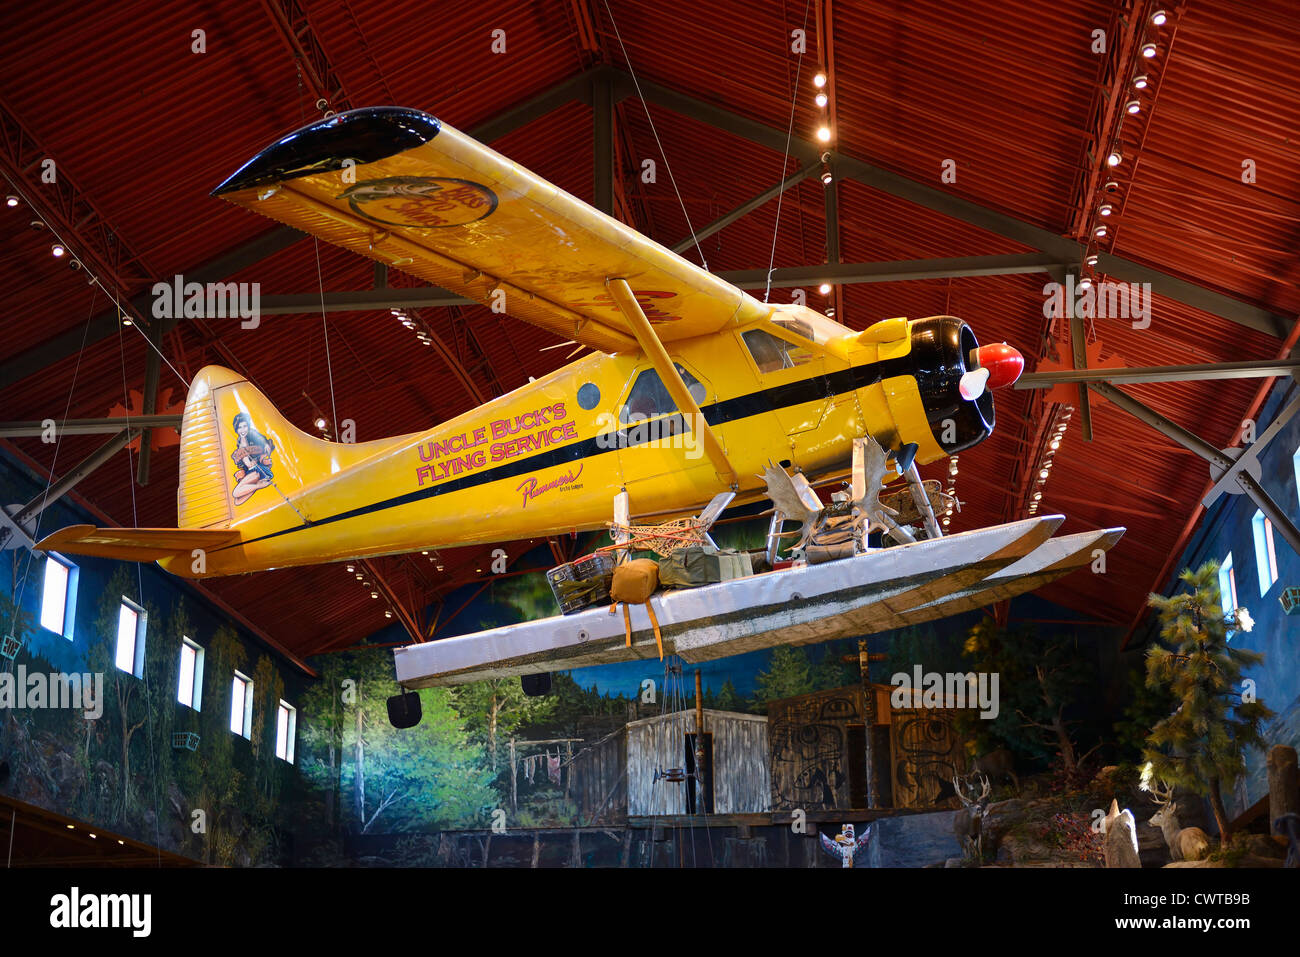 Yellow Beaver float plane hanging in the rafters of an outfitters store Stock Photo